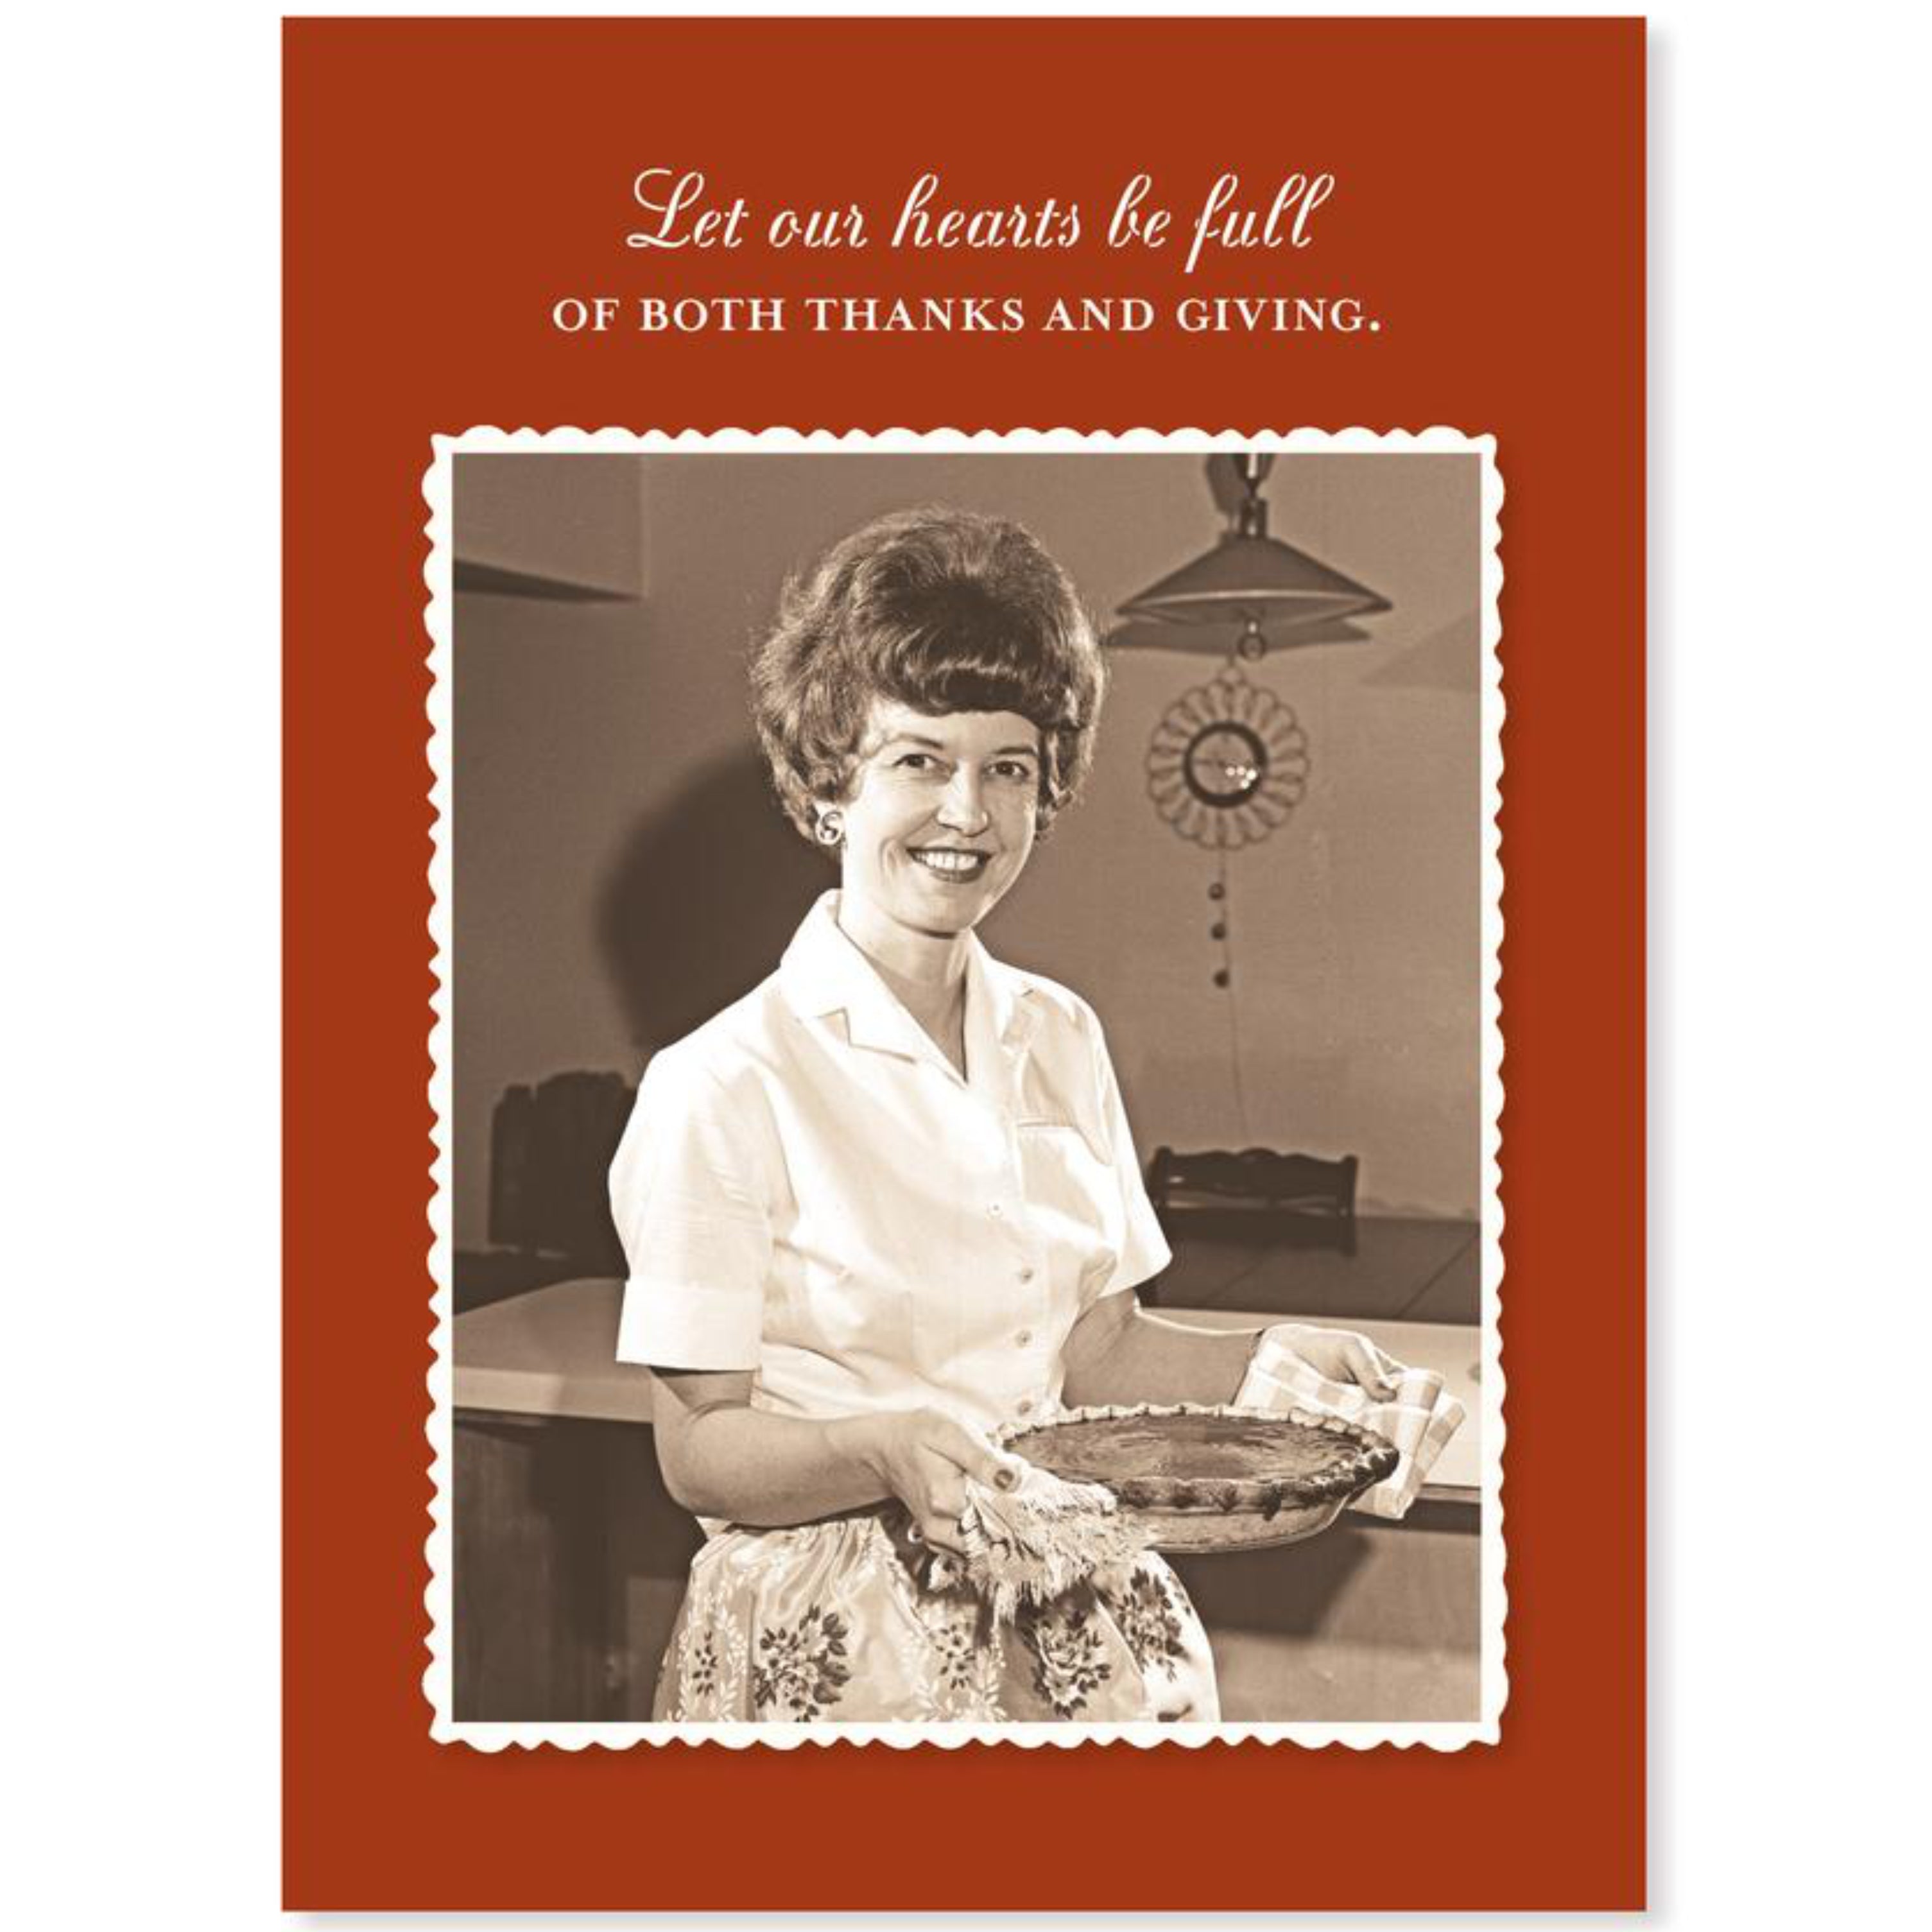 Shannon Martin Thanksgiving Card – Let Our Hearts Be Full